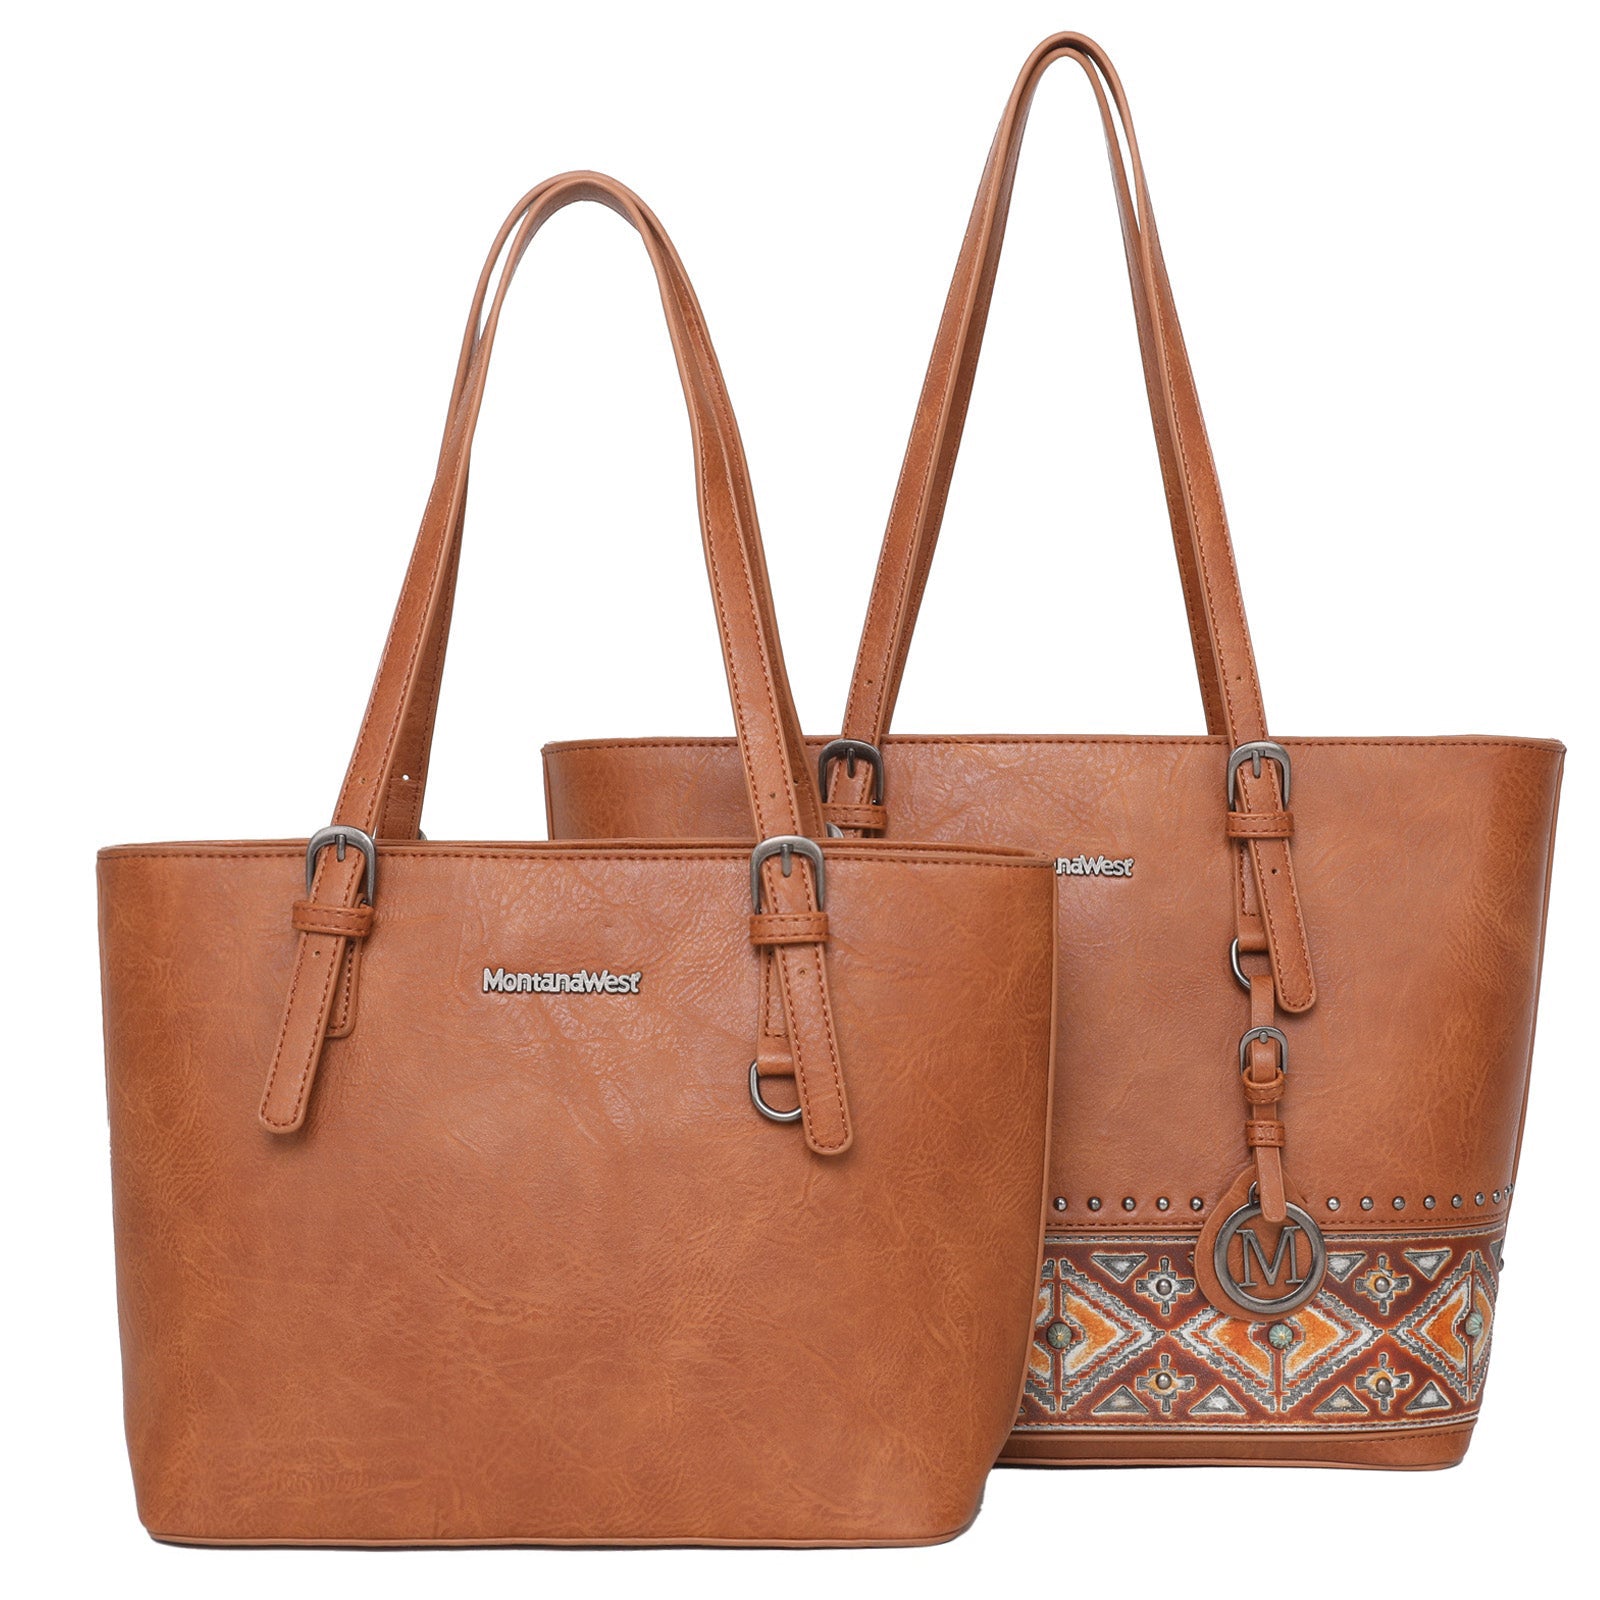 Montana West 2pcs Tote Bag Set (Concealed Carry Aztec Tote & Small Basic Tote) - Cowgirl Wear